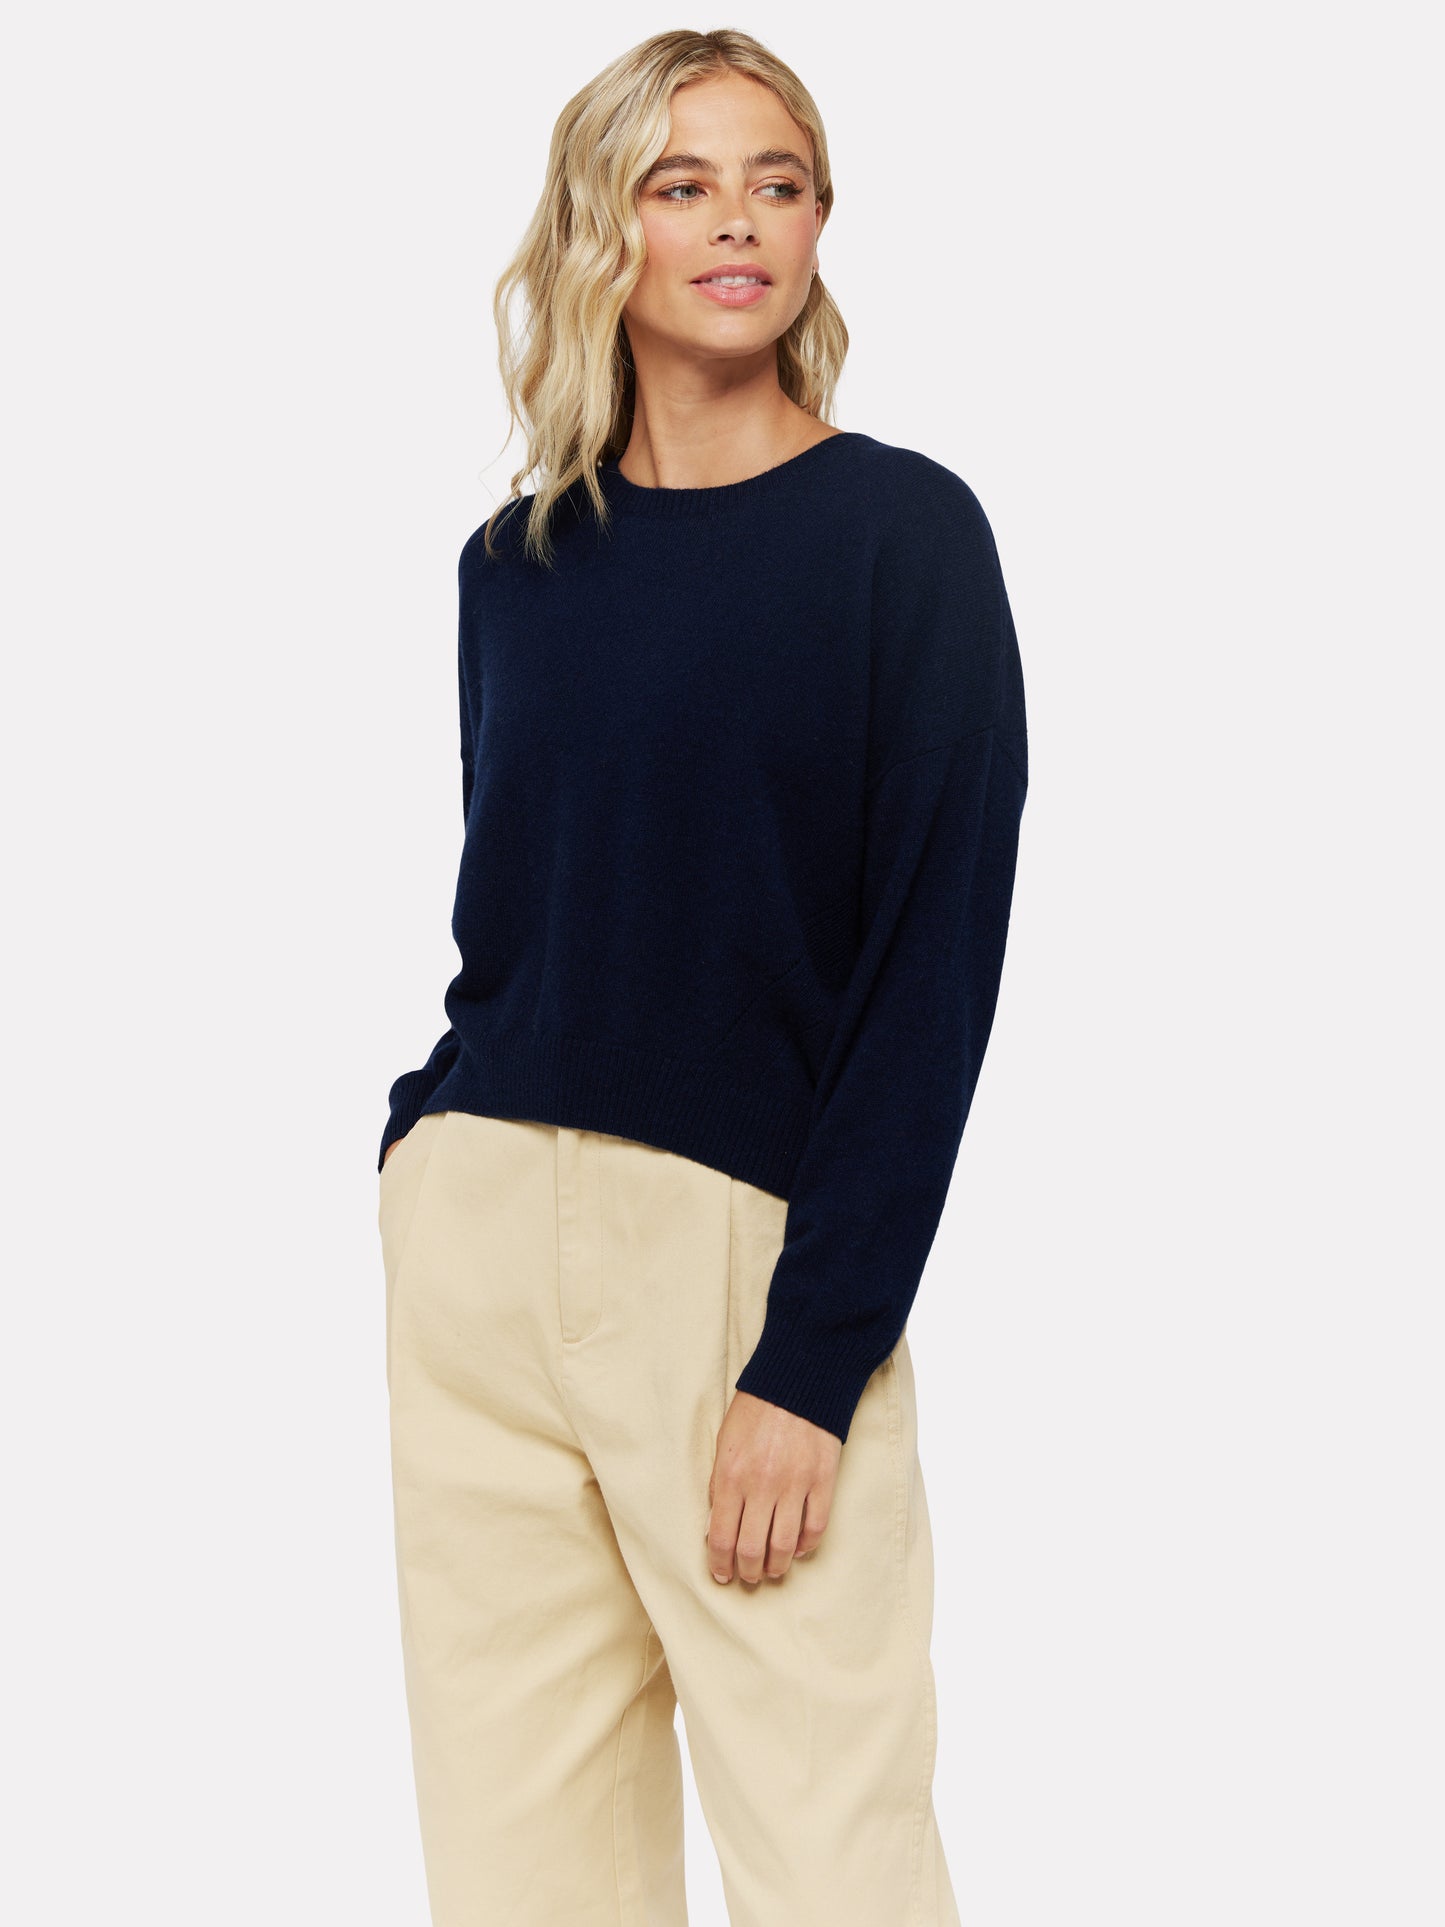 Pippa Embroidered Cashmere Knit